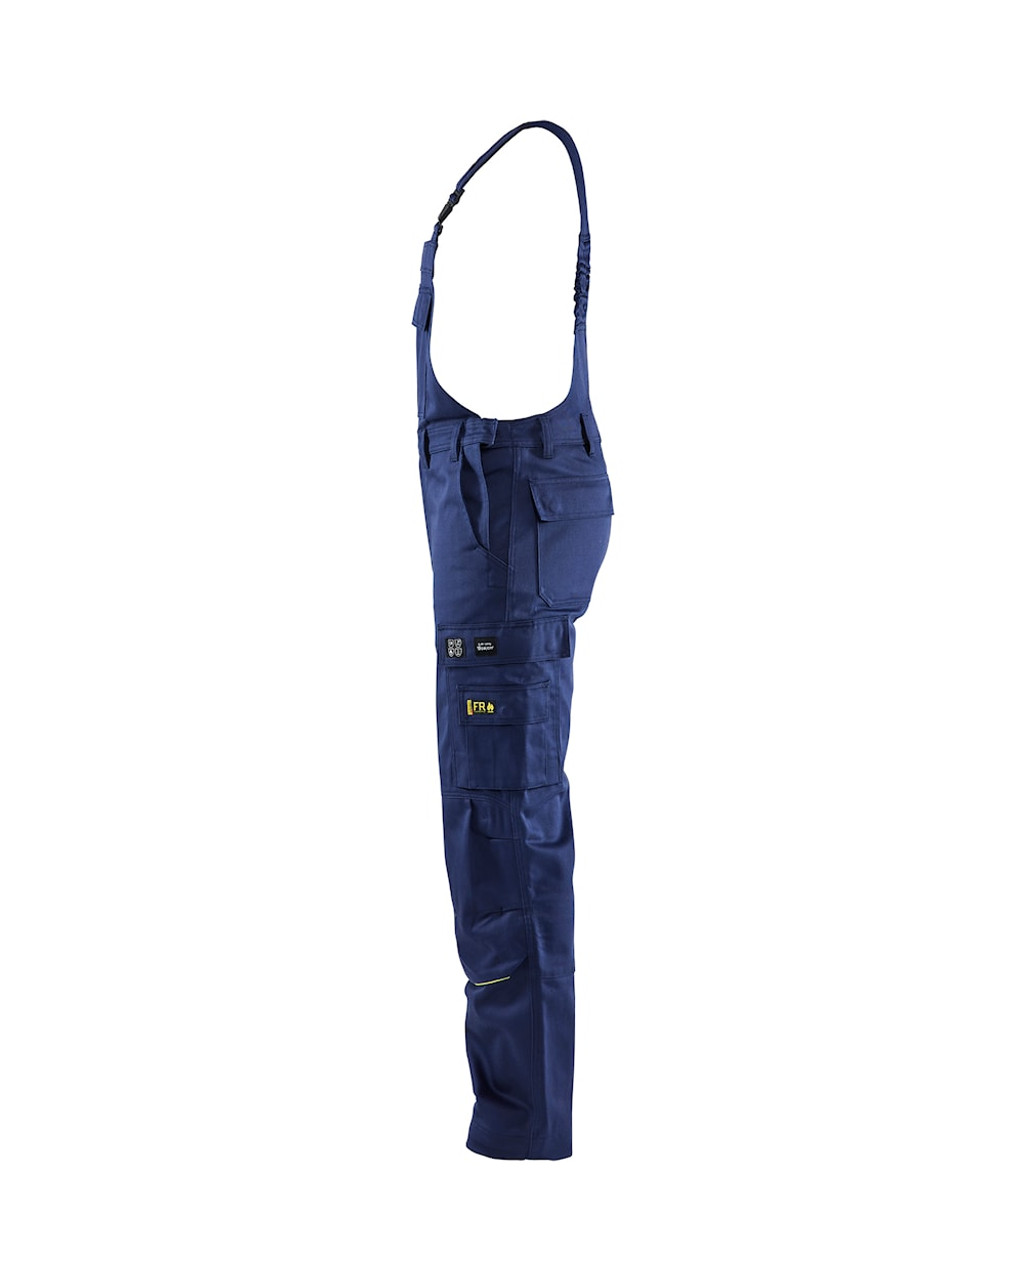 Buy online in Australia and New Zealand BLAKLADER Overalls  2601 with Kneepad Pockets  for Electricians that have Anti-Flame